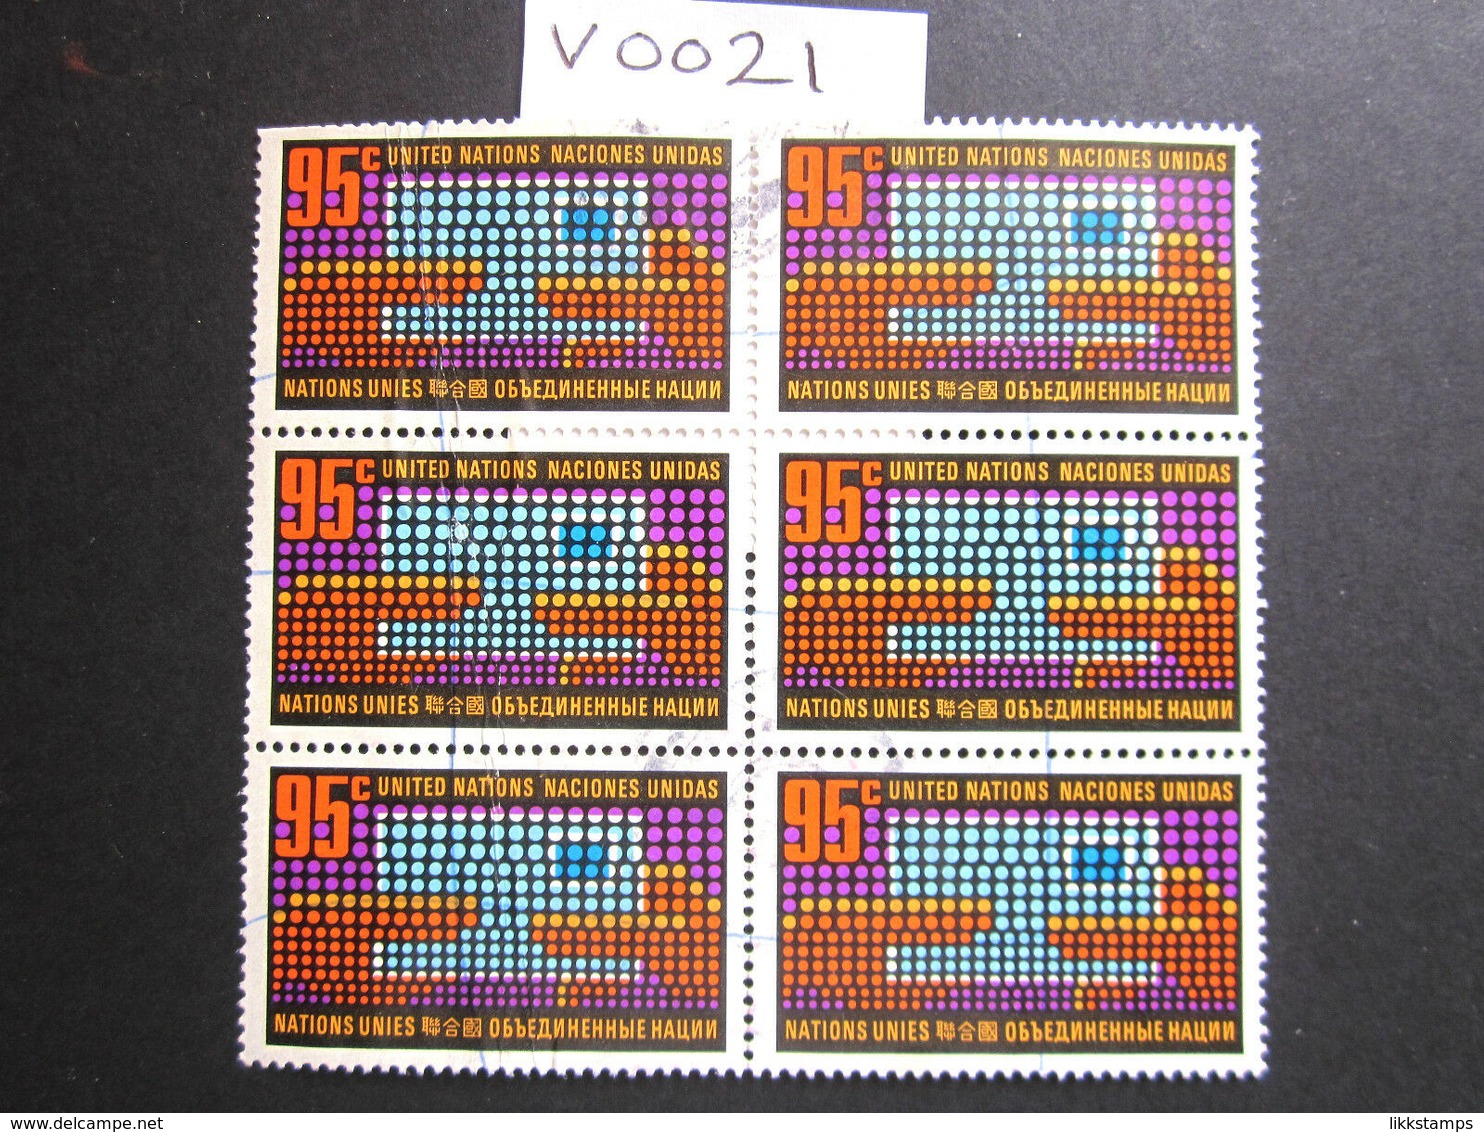 1971 A FINE USED BLOCK OF 6 "SG 224" PICTORIAL UNITED NATIONS USED STAMPS ( V0021 ) #00349 - Colecciones & Series